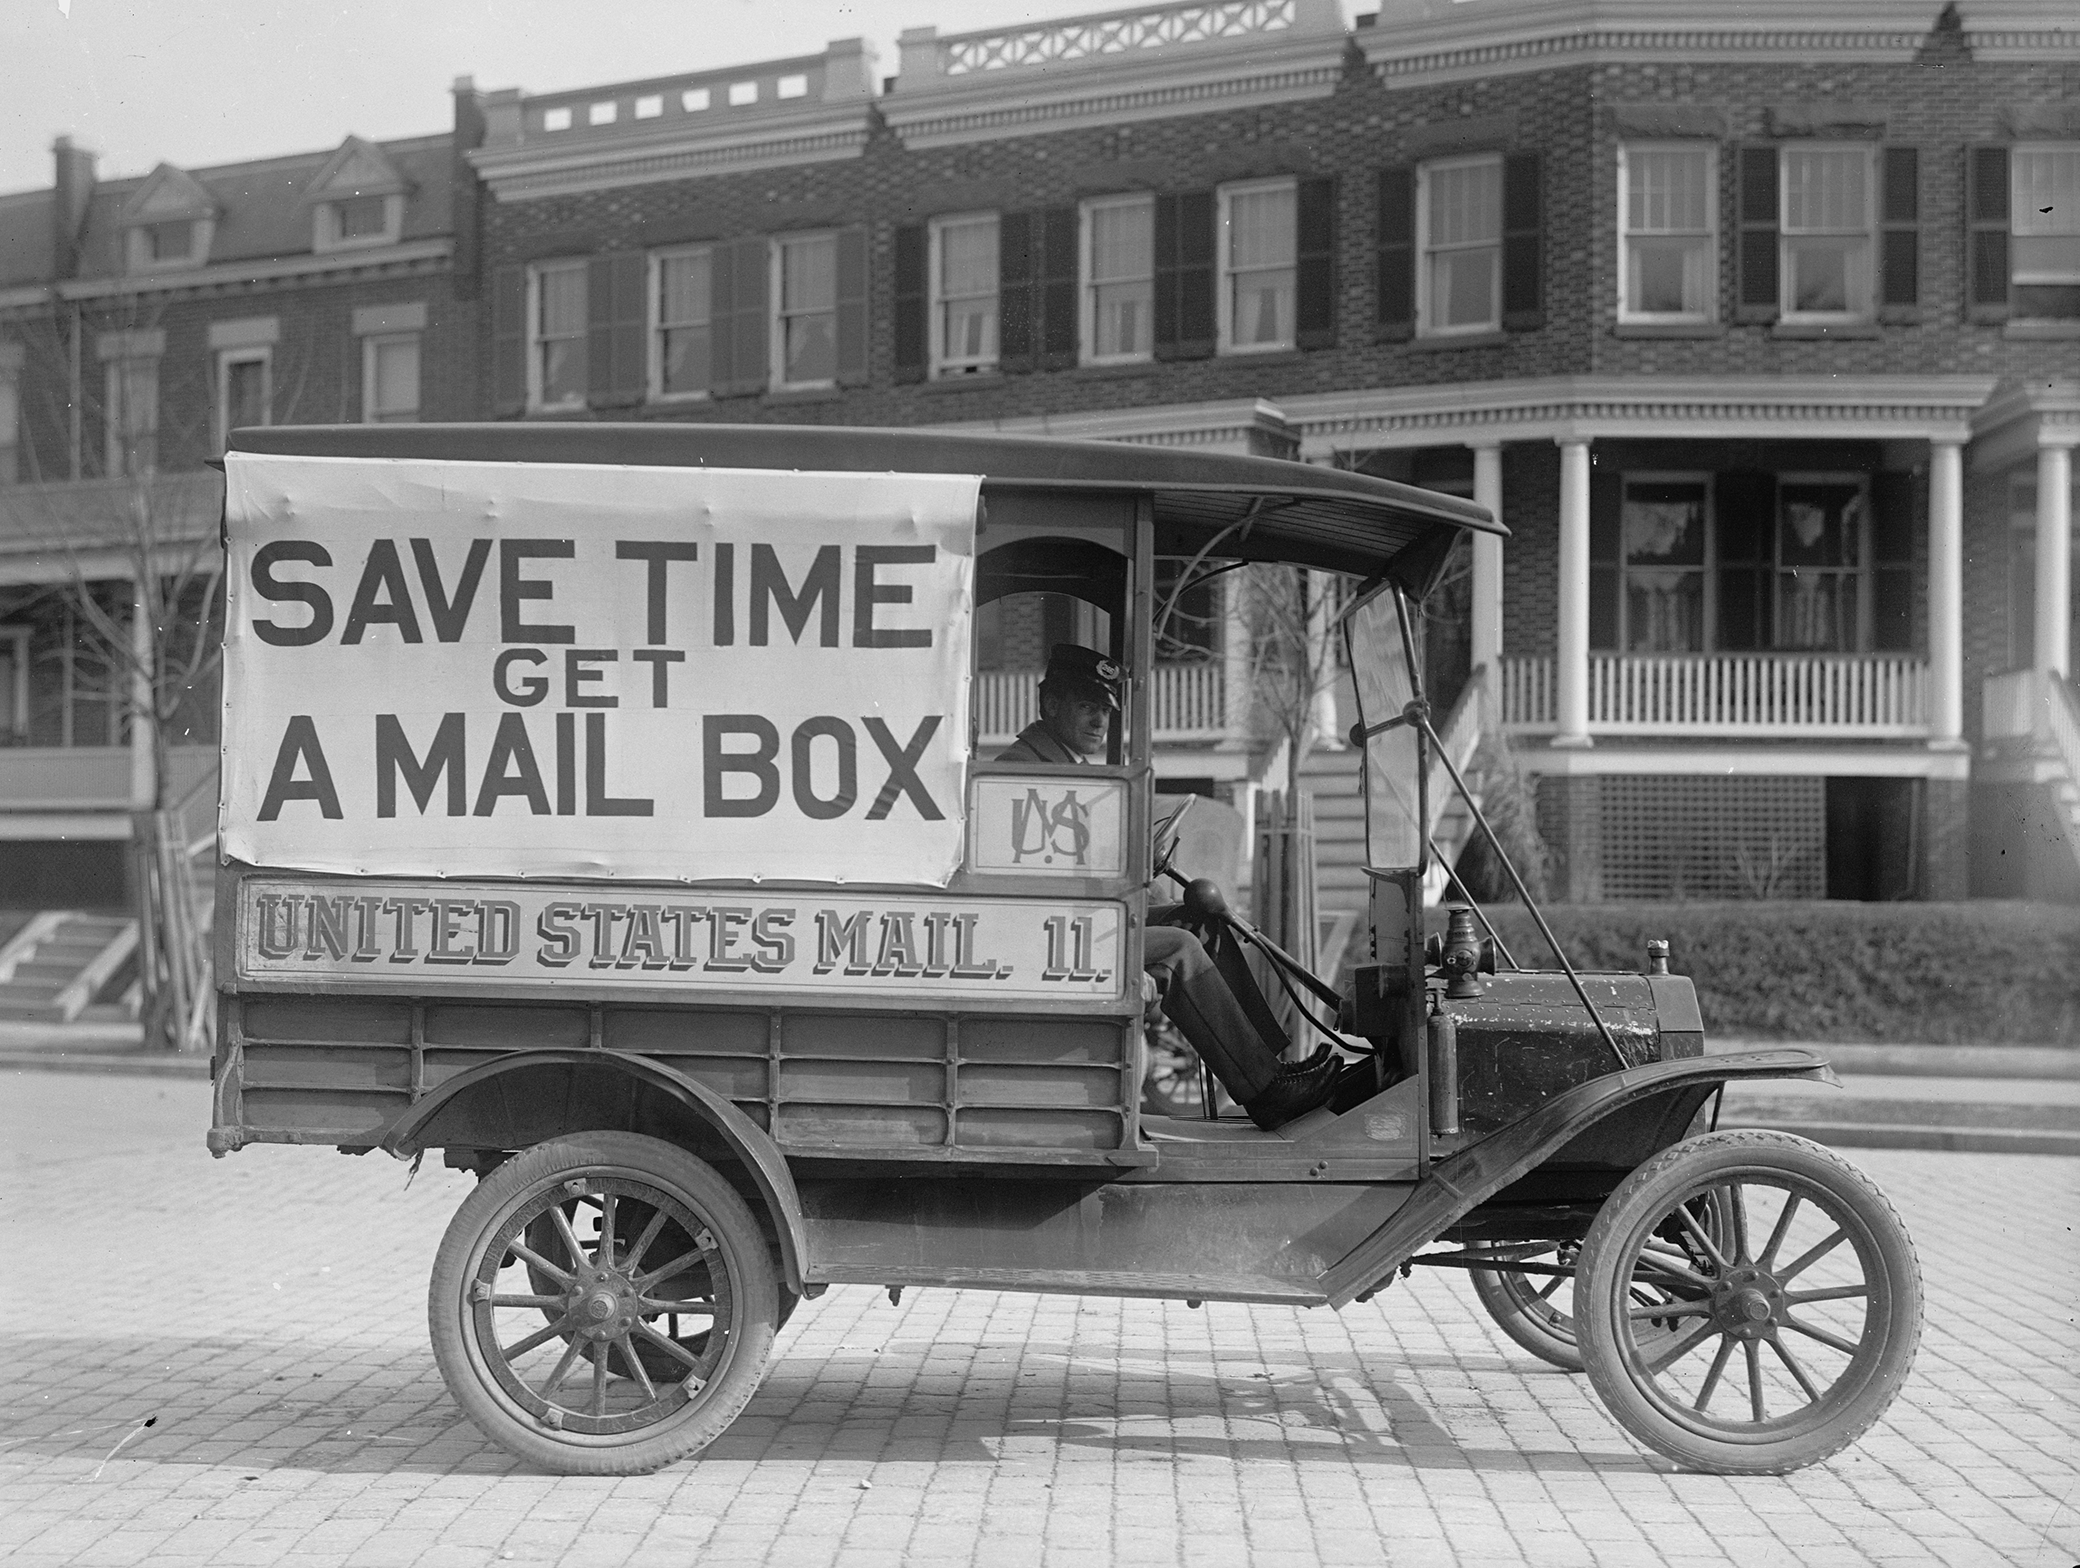 Post Office Department mail wagon, 1916. Photograph by Harris & Ewing. Library of Congress, Prints and Photographs Division.